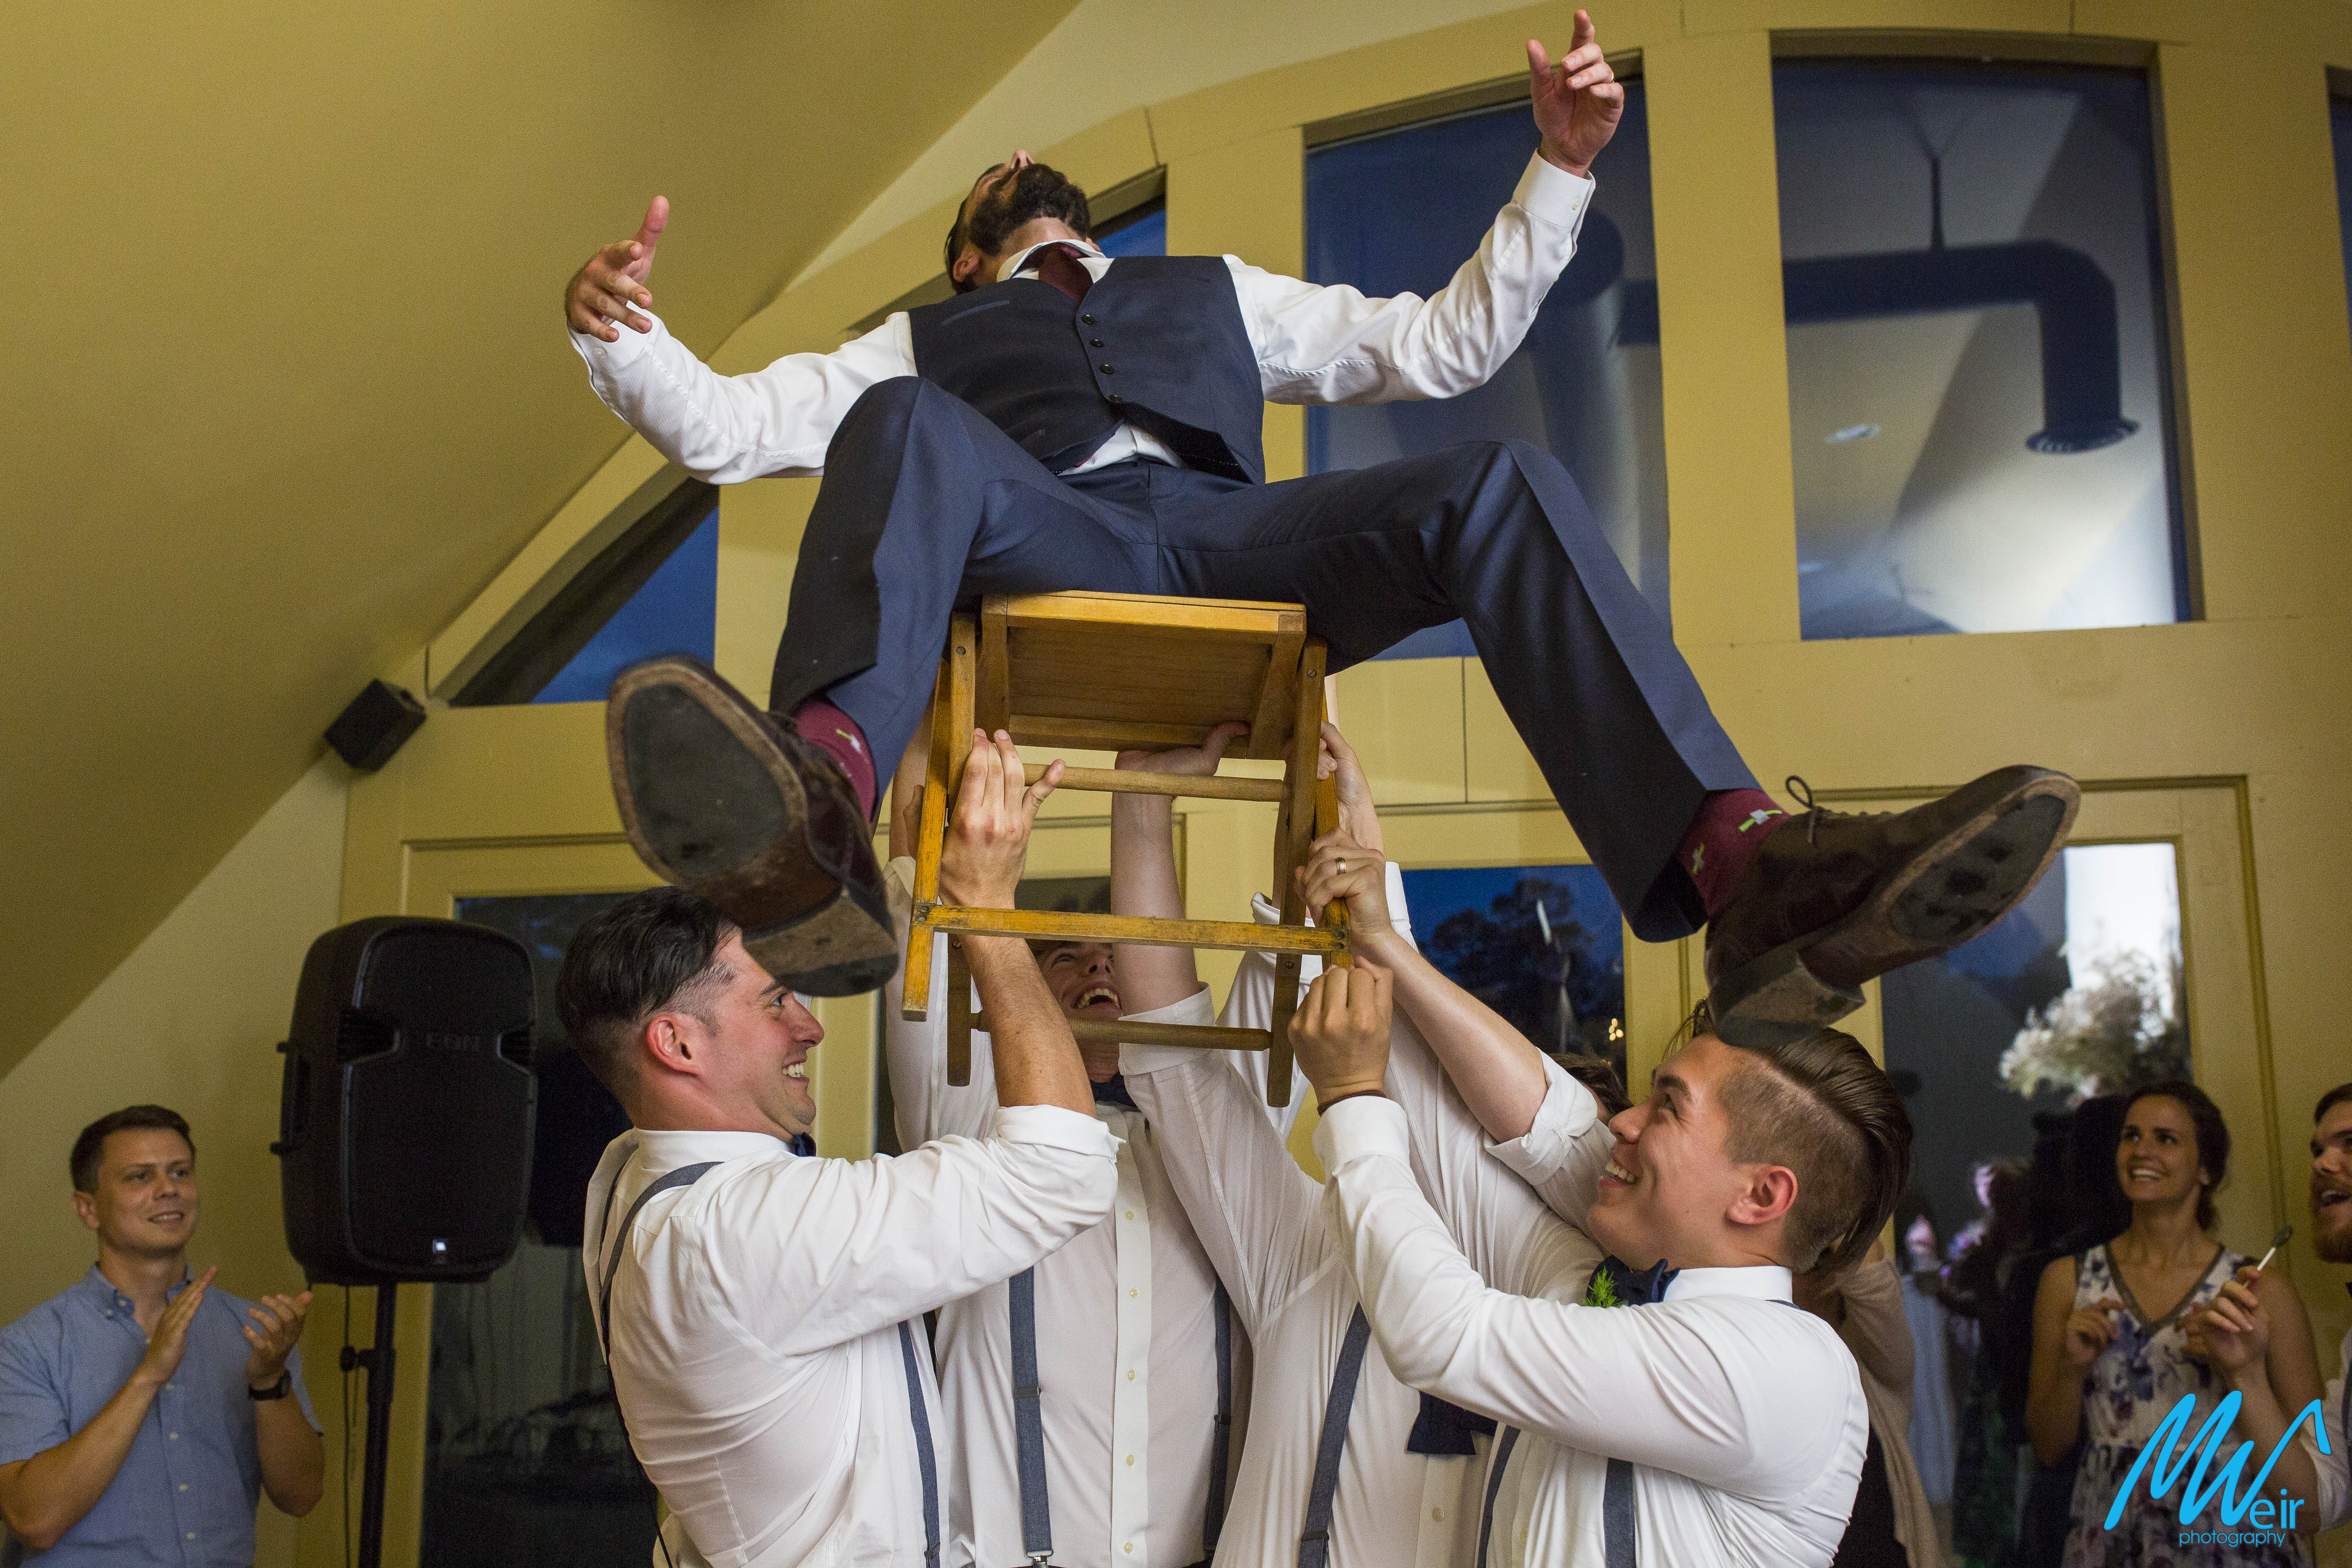 groom lifted on a chair during wedding reception dancing